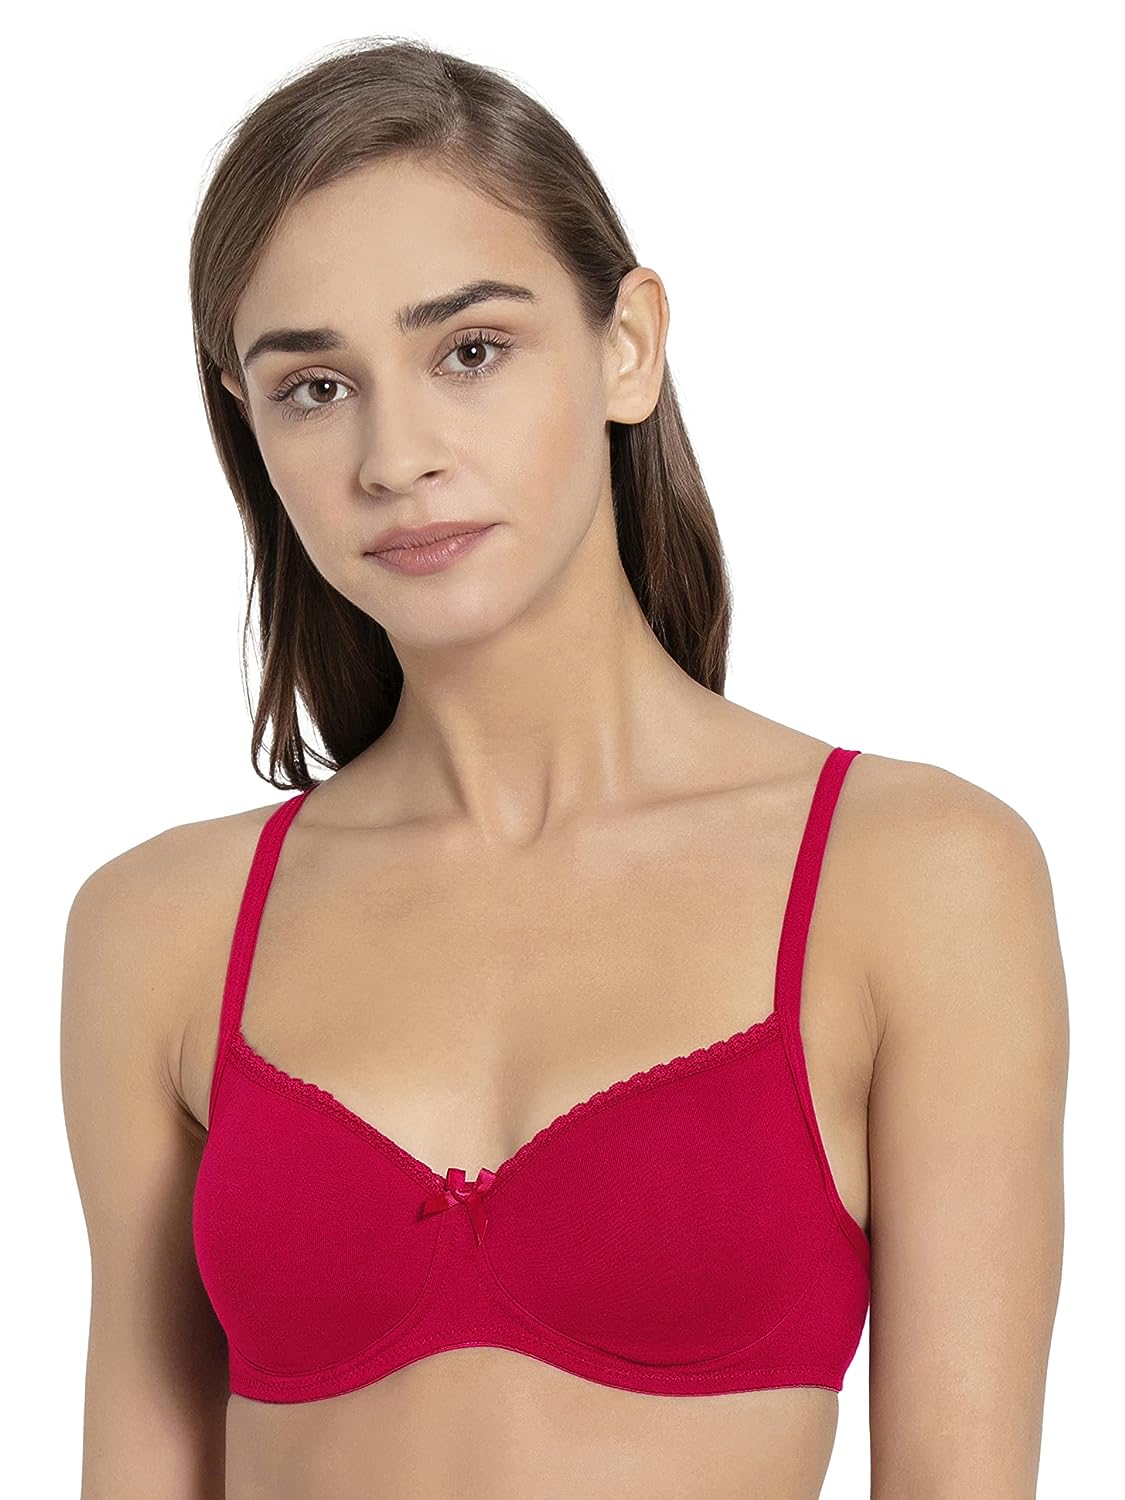 Jockey Brand Non-Wired Fixed Straps Lightly Padded Womens Every Day Bra (SS22JO1723-P)